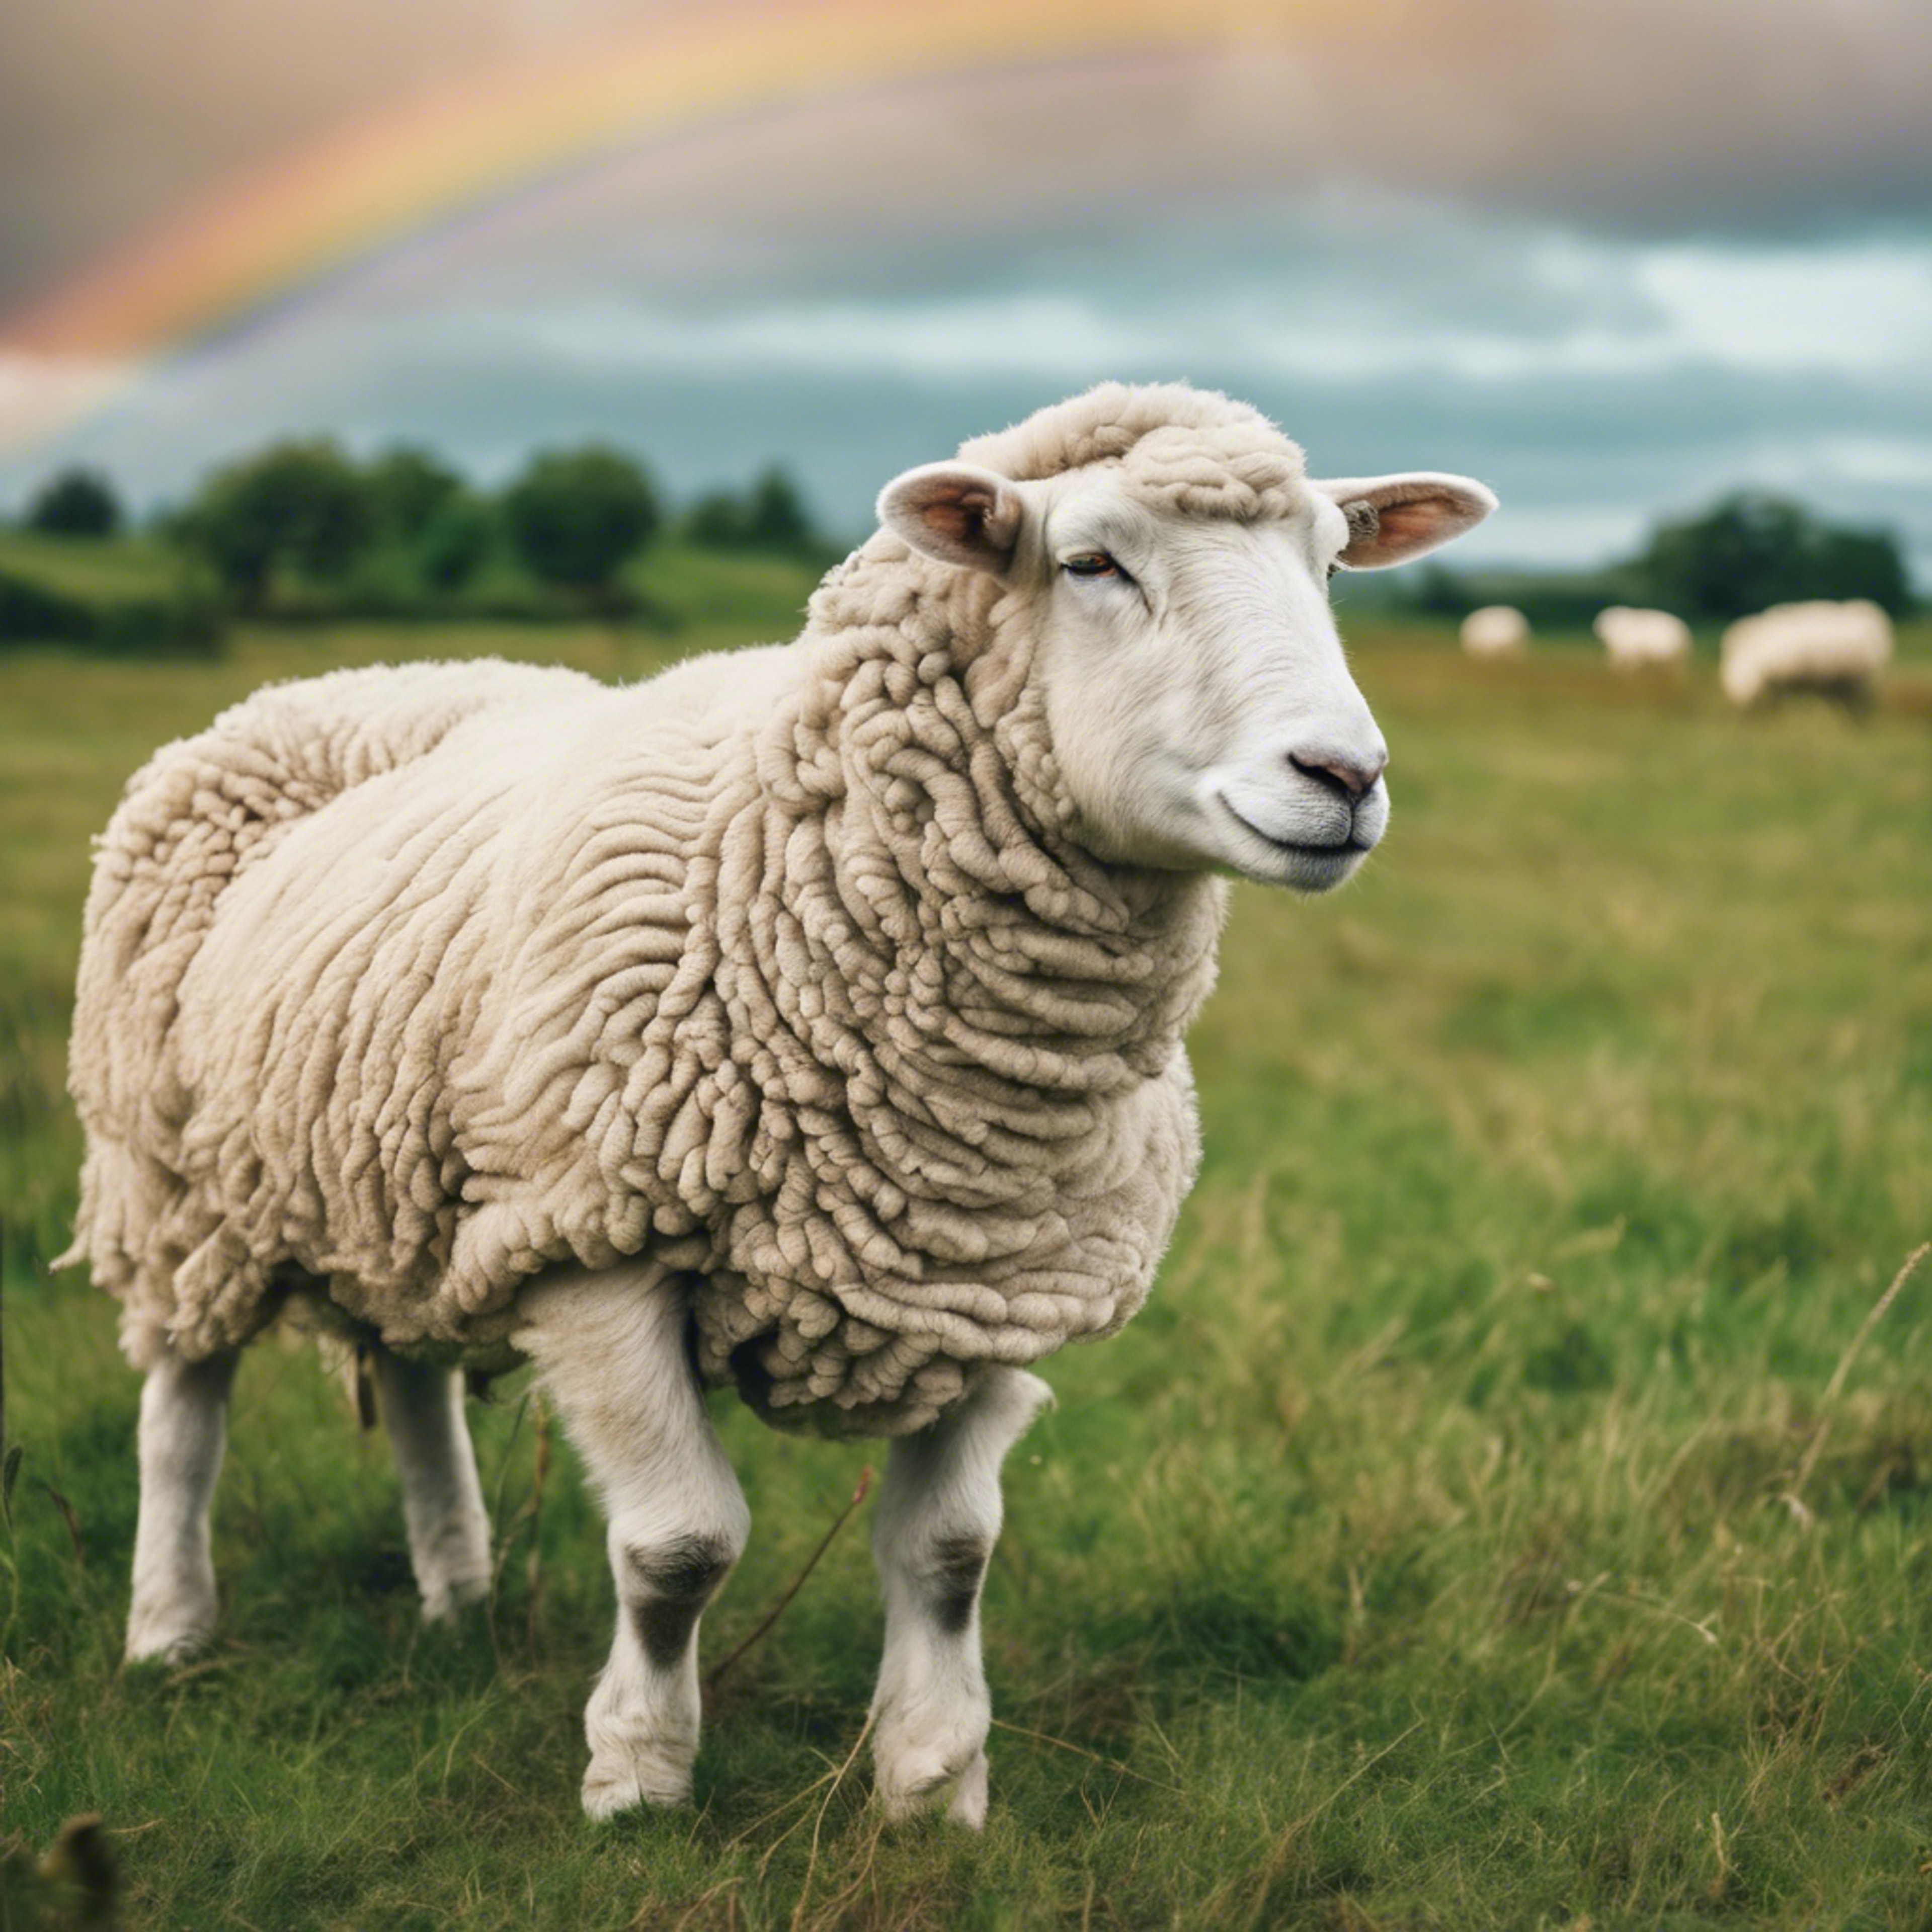 A beautiful open field of grass with puffy white cloud sheep that create rainbow trails as they bound joyfully around. Tapet[bc005b864b354d3896db]